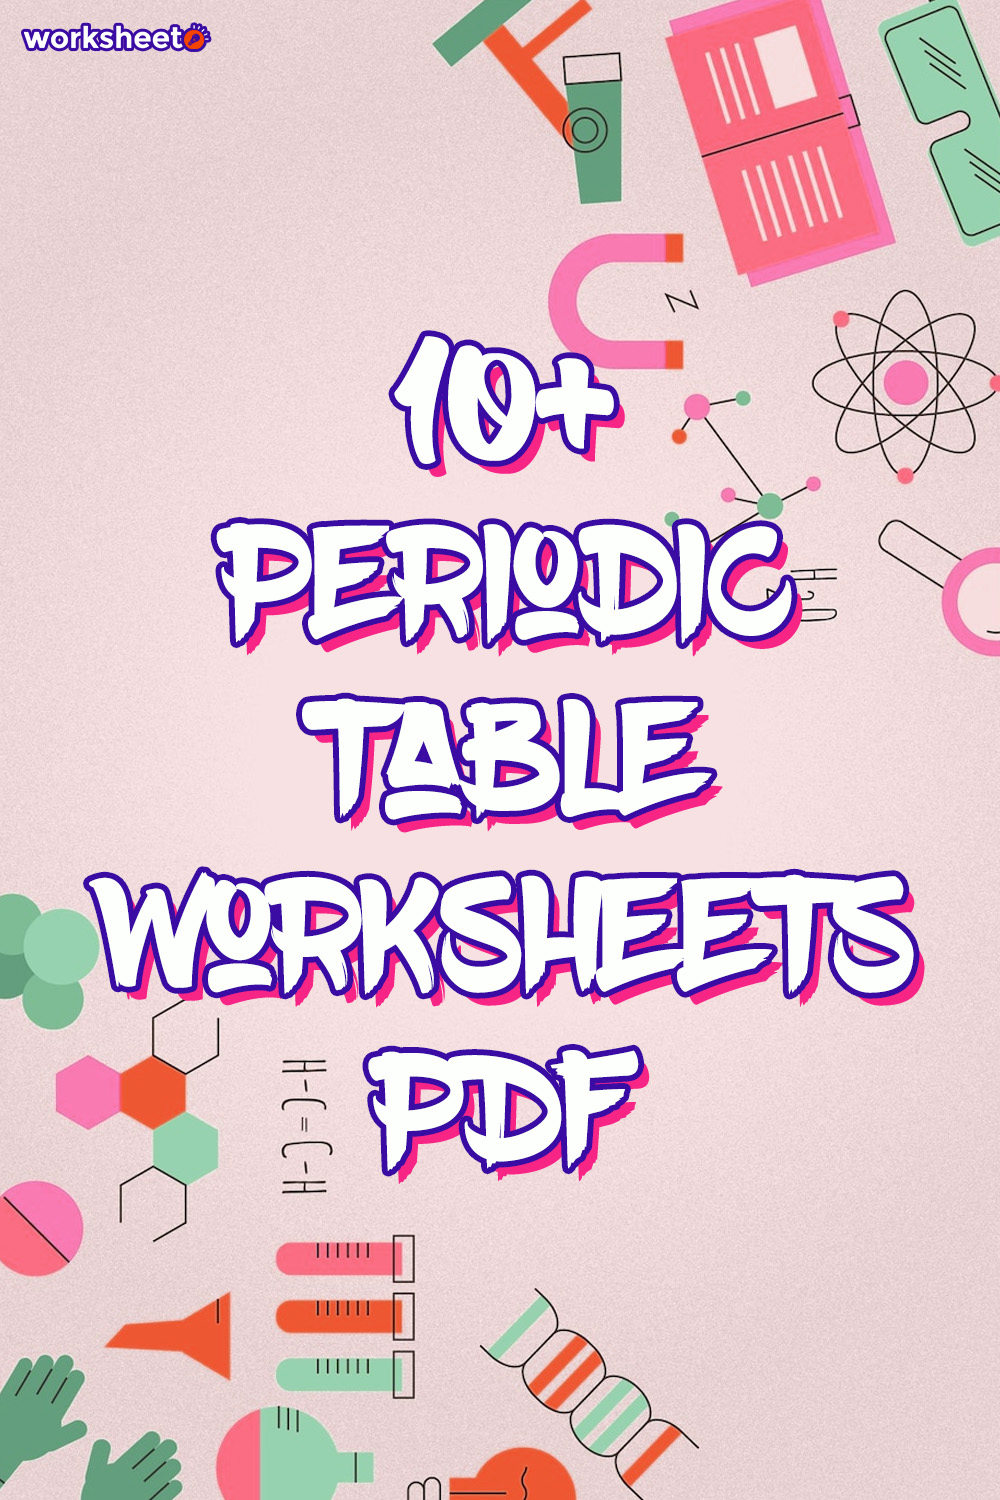 13 Images of Periodic Table Worksheets PDF